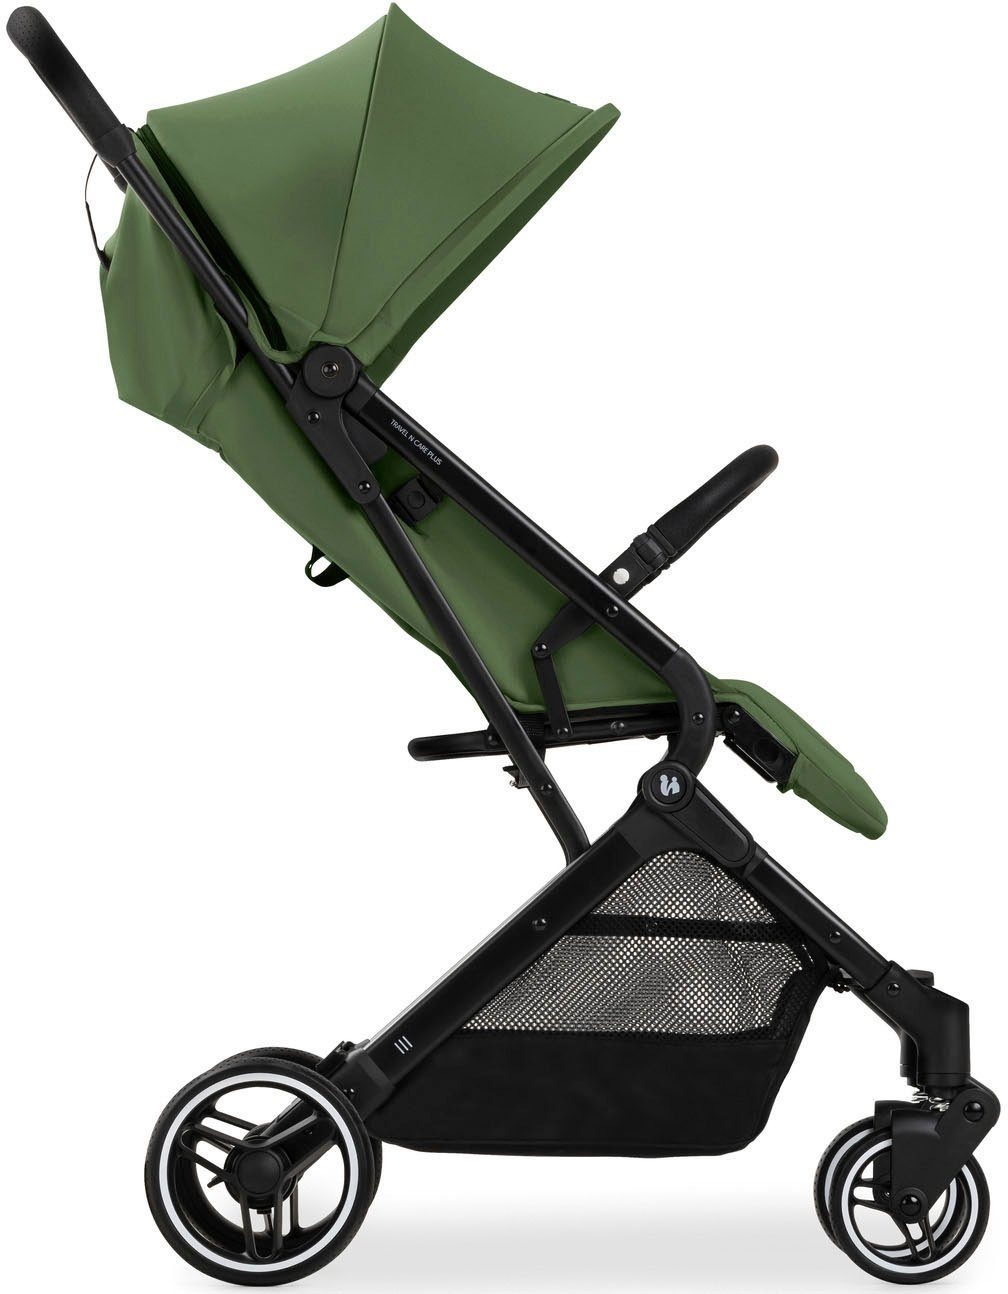 Care Hauck Kinder-Buggy N green Buggy, Travel Plus